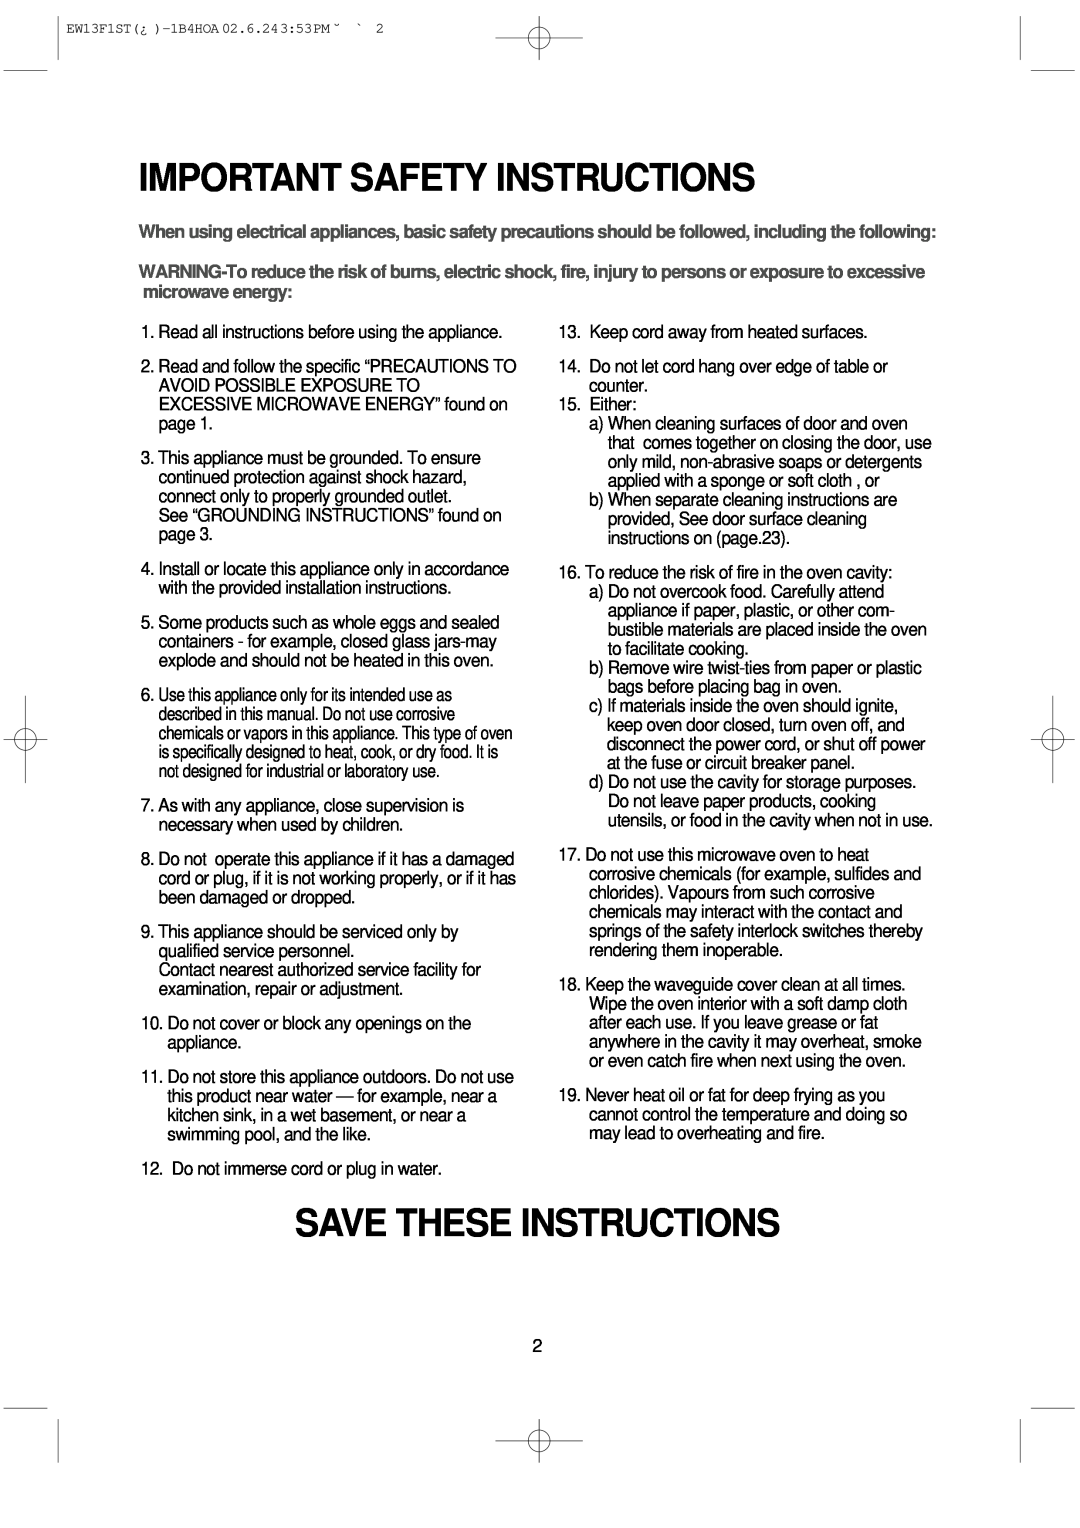 Daewoo EW13F1ST manual Important Safety Instructions, Save These Instructions 